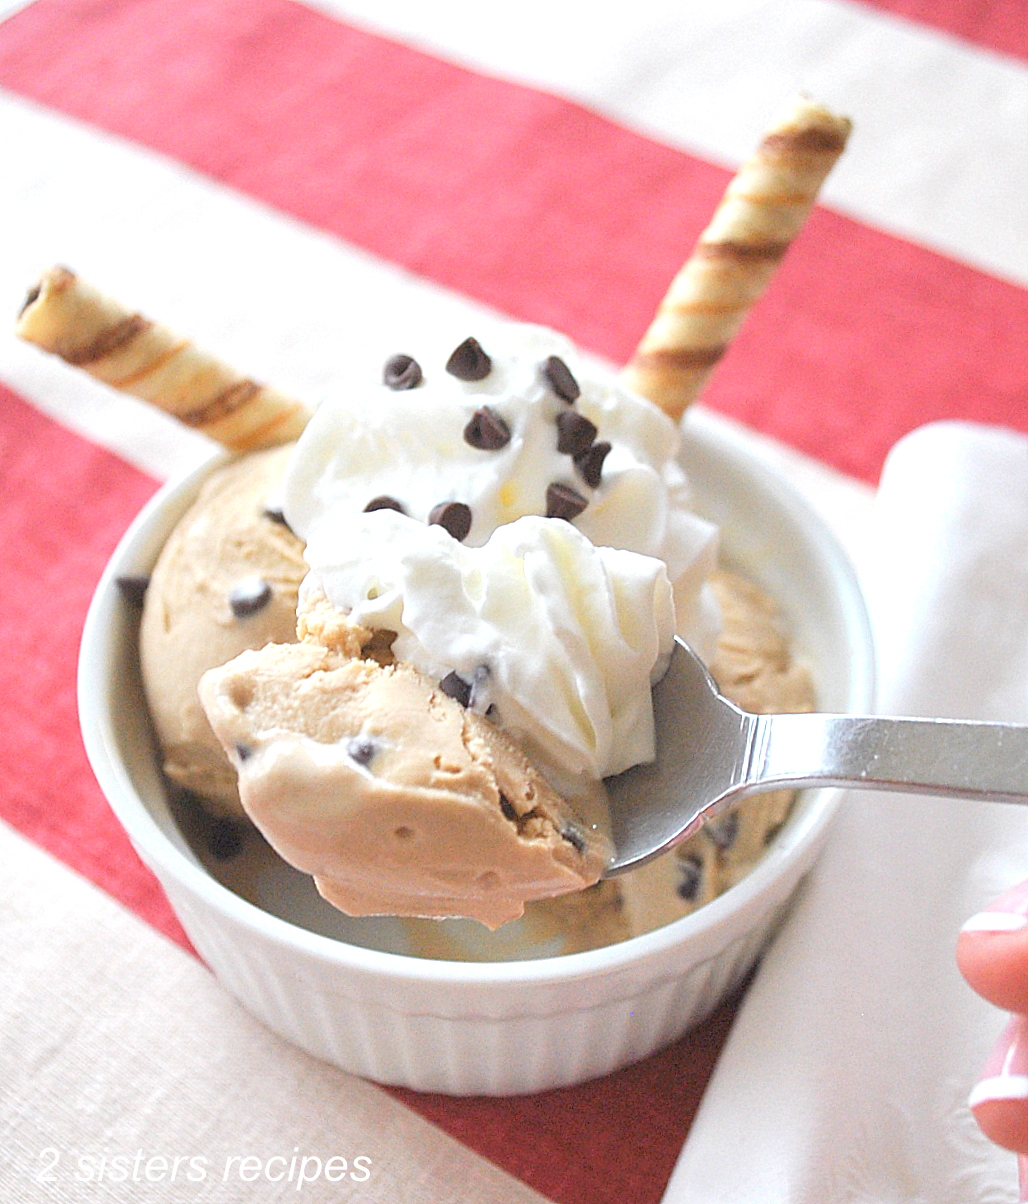 Spponful of ice cream with whipped cream. by 2sistersrecipes.com